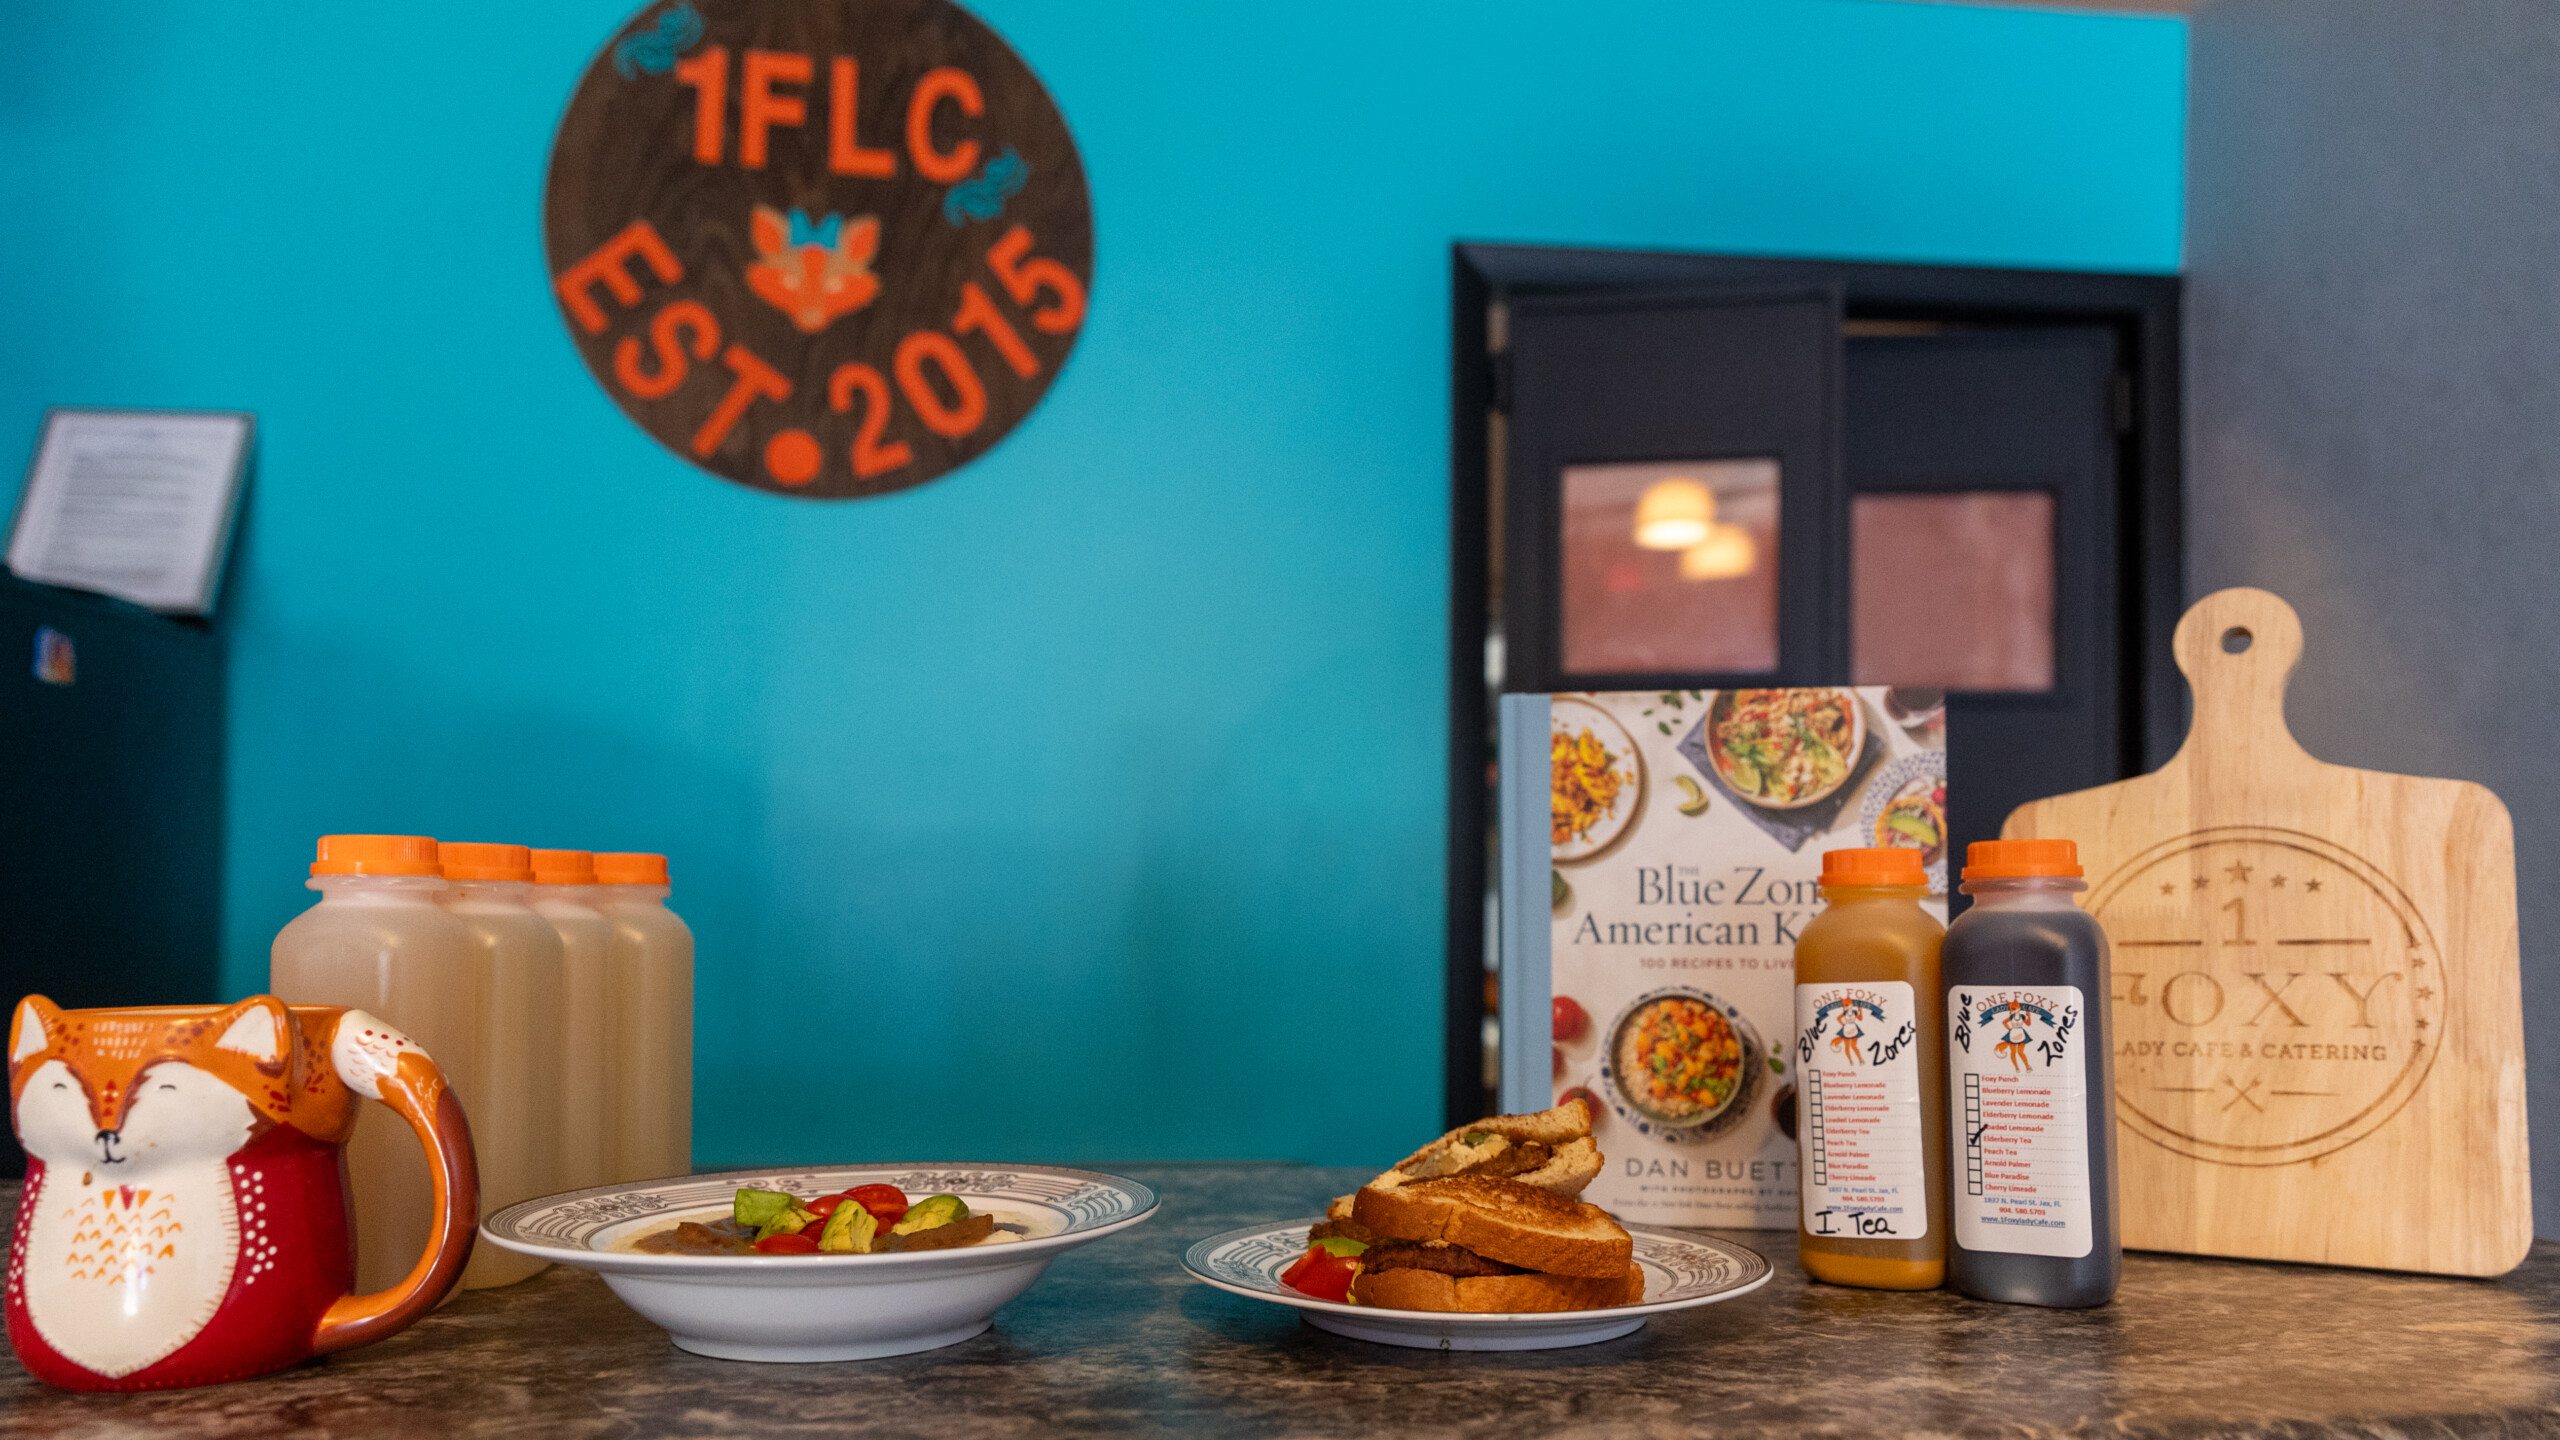 The menu at One Foxy Lady Cafe features a vegan sandwich, breakfast gyro, grits and vegan sausage combination as well as an anti-inflammatory drink. The dishes were created by Jacksonville native Shandon Benjamin Fox. | Will Brown, Jacksonville Today